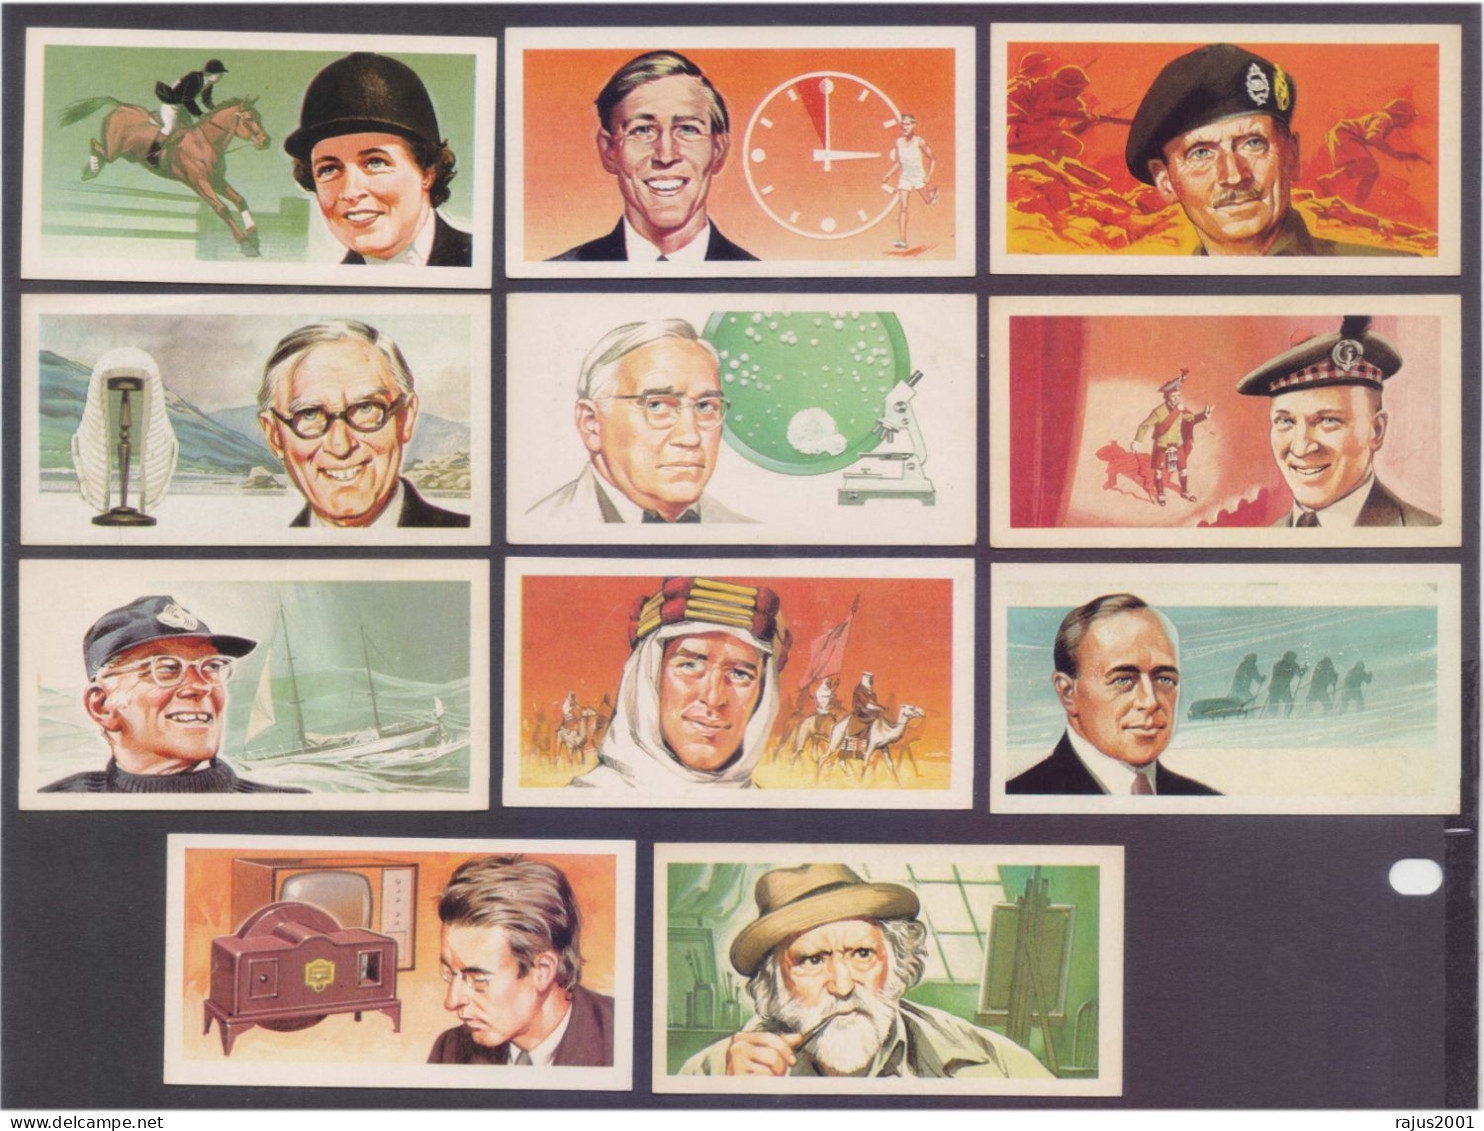 Complete Set Of 50 Most Famous Men & Women Personalities, Famous People, Originally Issued With BROOKE BOND TEA Card - Freemasonry